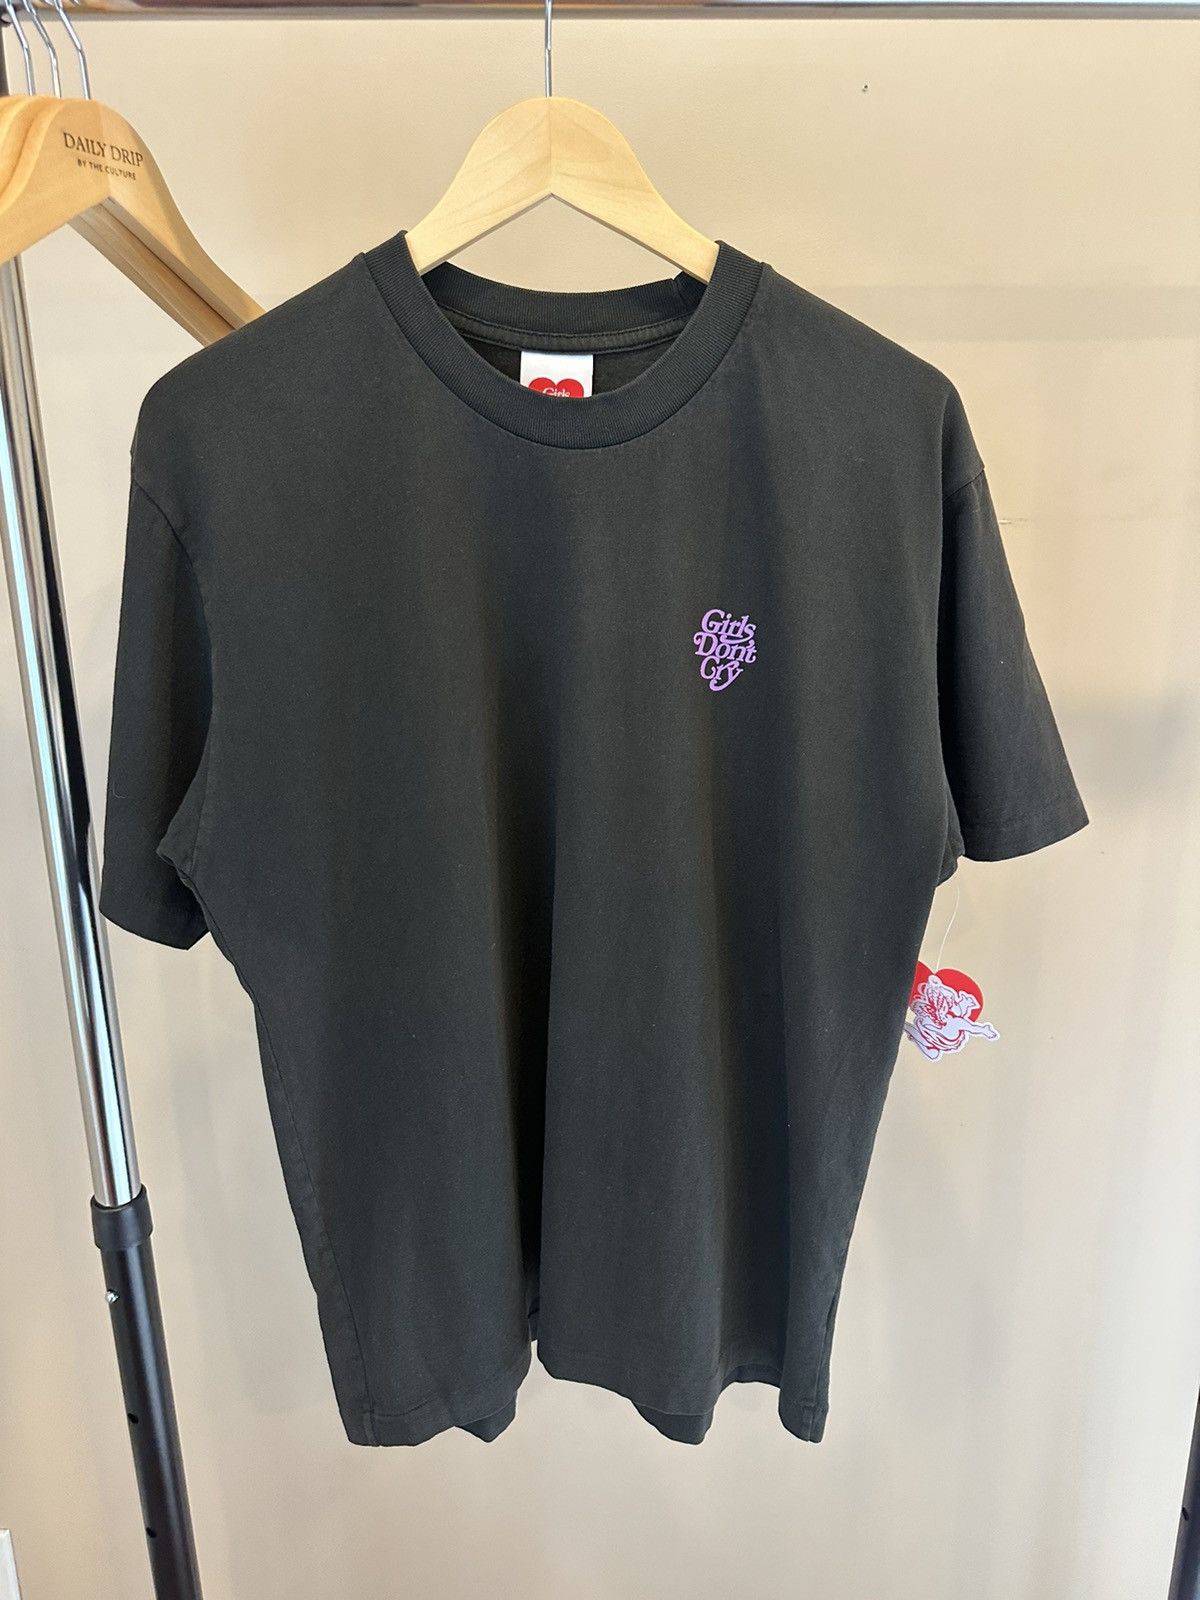 Girls Dont Cry Girls Dont Cry GDC logo S/S tee black and purple | Grailed